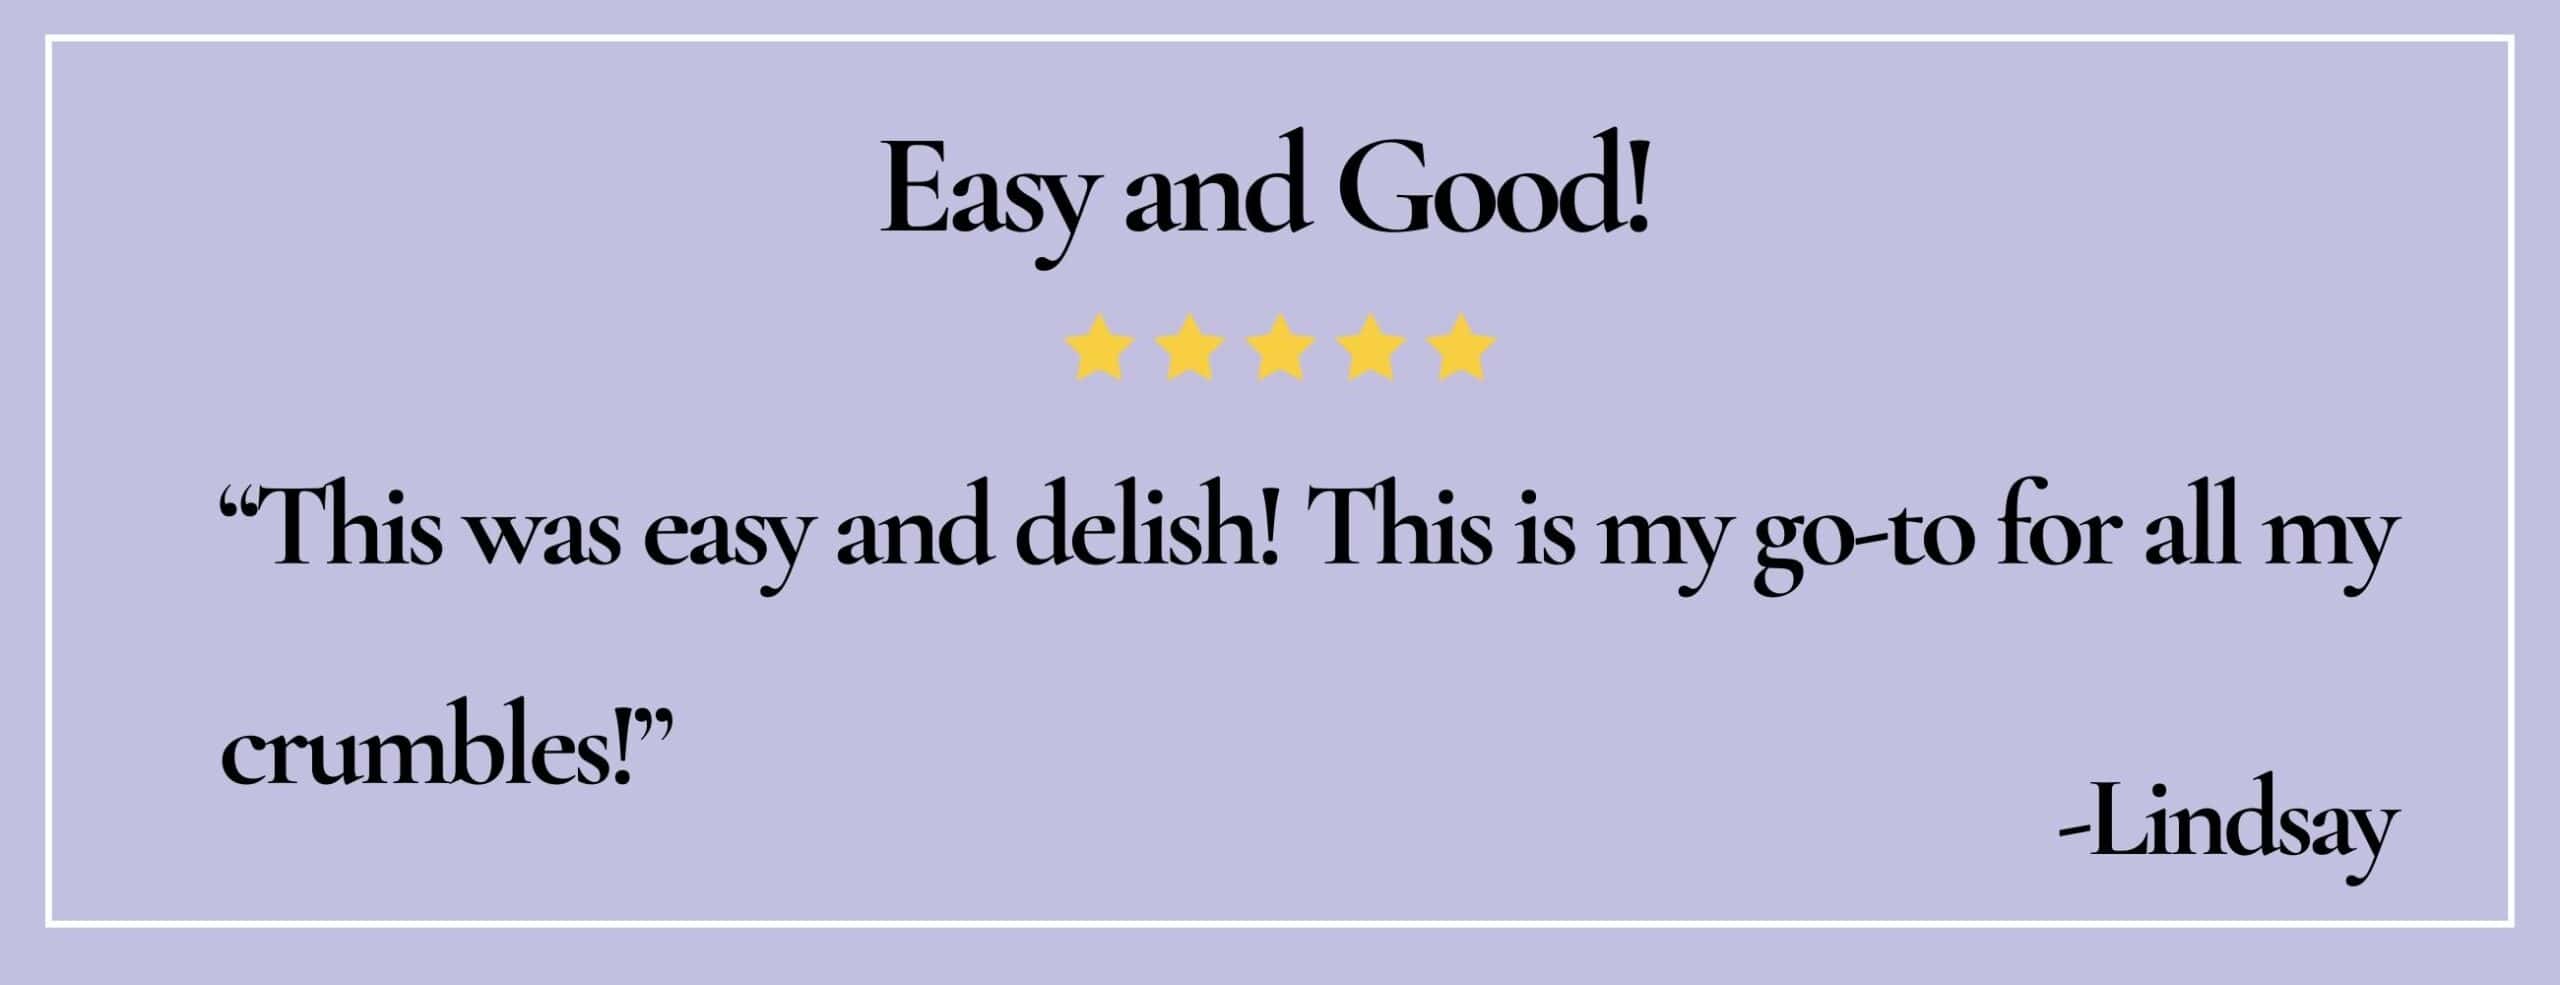 text box with quote:Easy and good! "This was easy and delish! This is my go to for all my crumbles!"-Lindsay